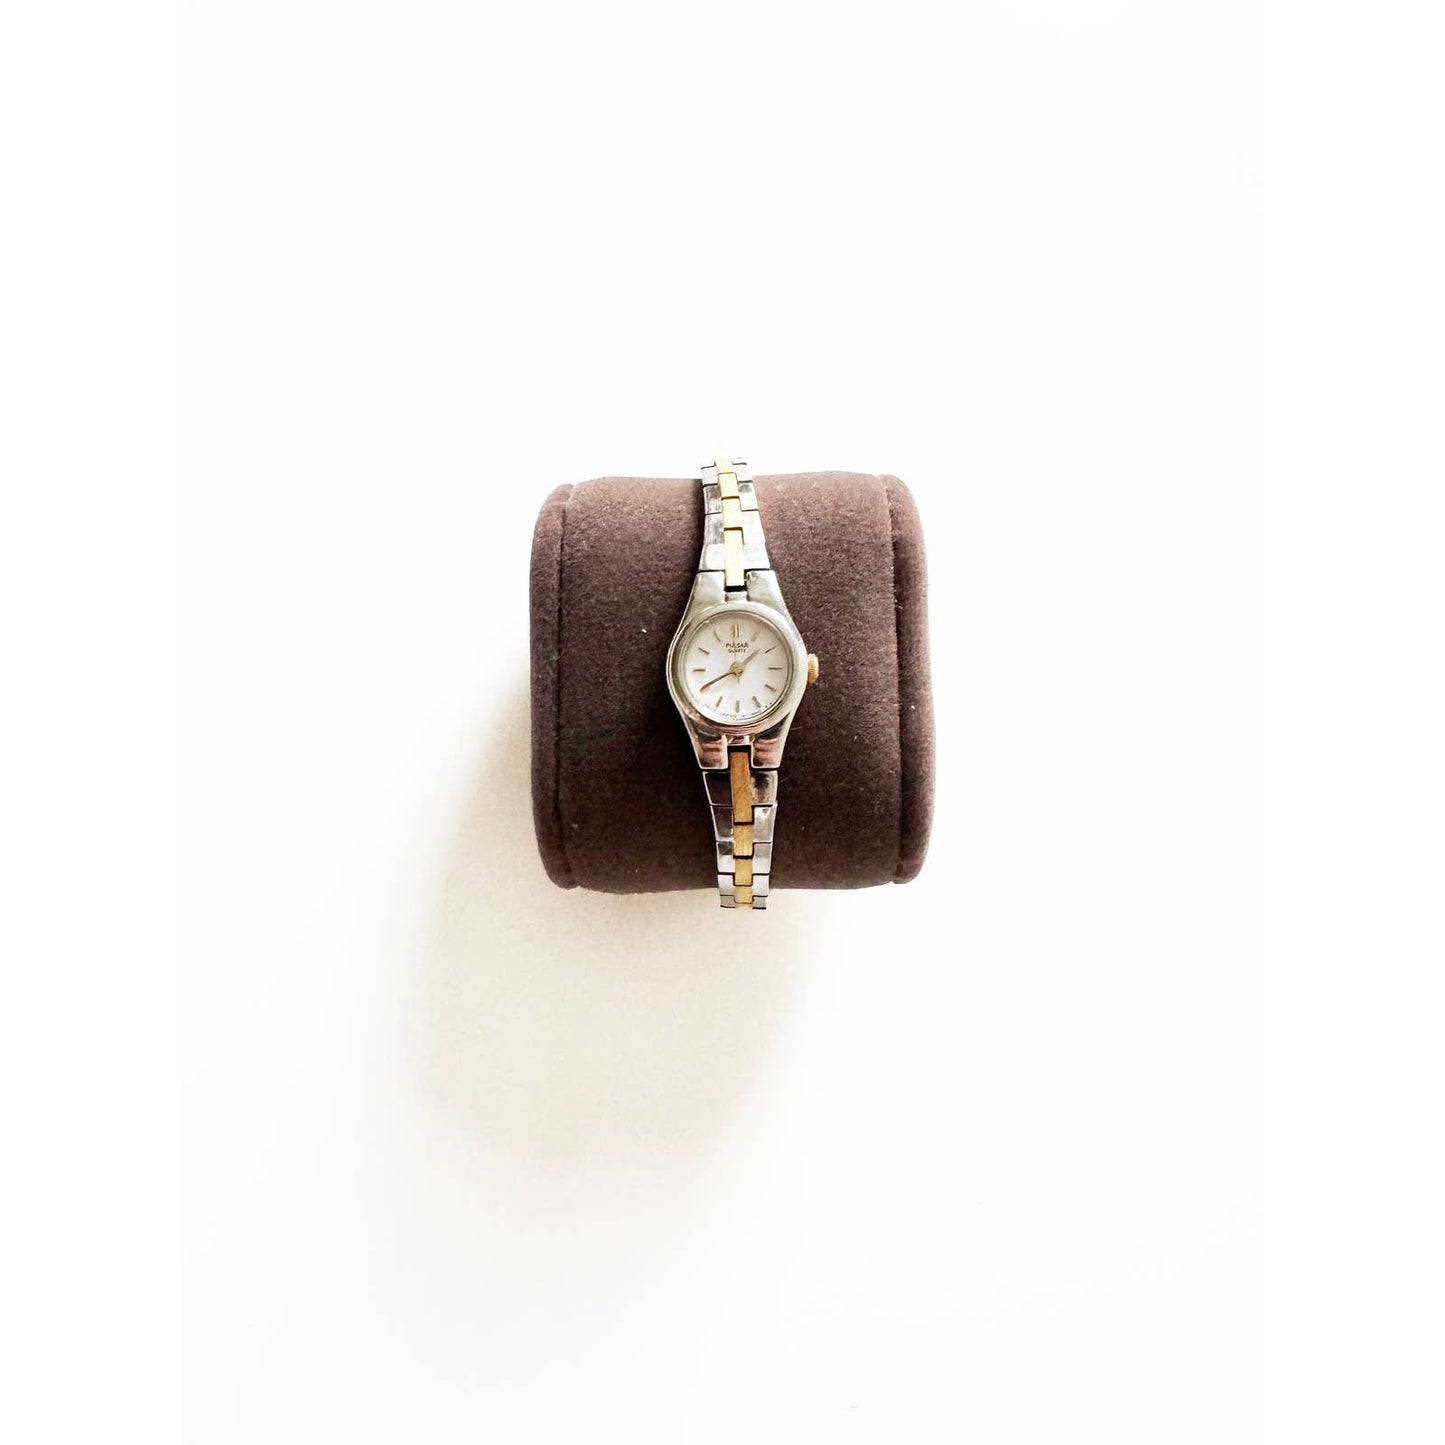 Vintage Small Two Tone Watch with Circular Face | Pulsar